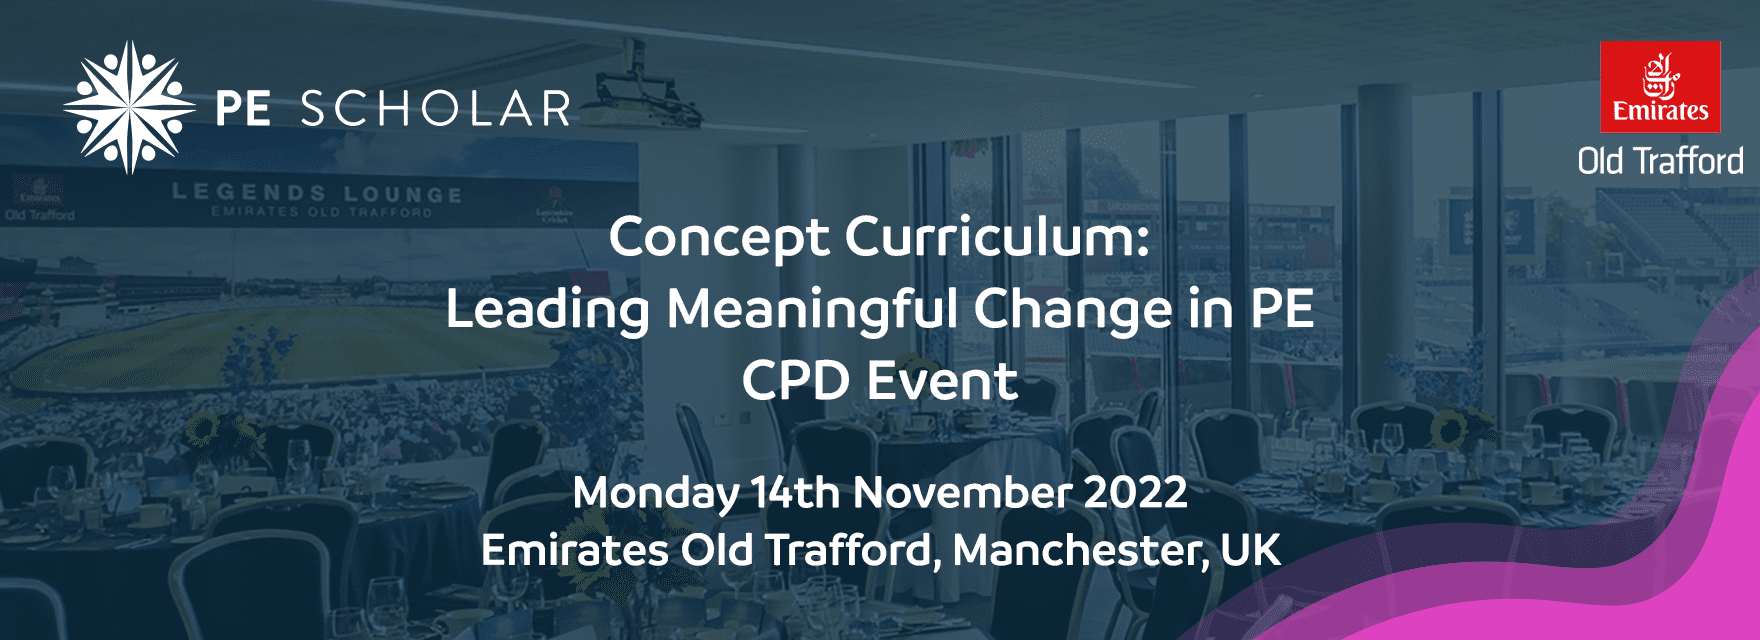 Featured image for “Concept Curriculum: Leading Meaningful Change in PE CPD Event”